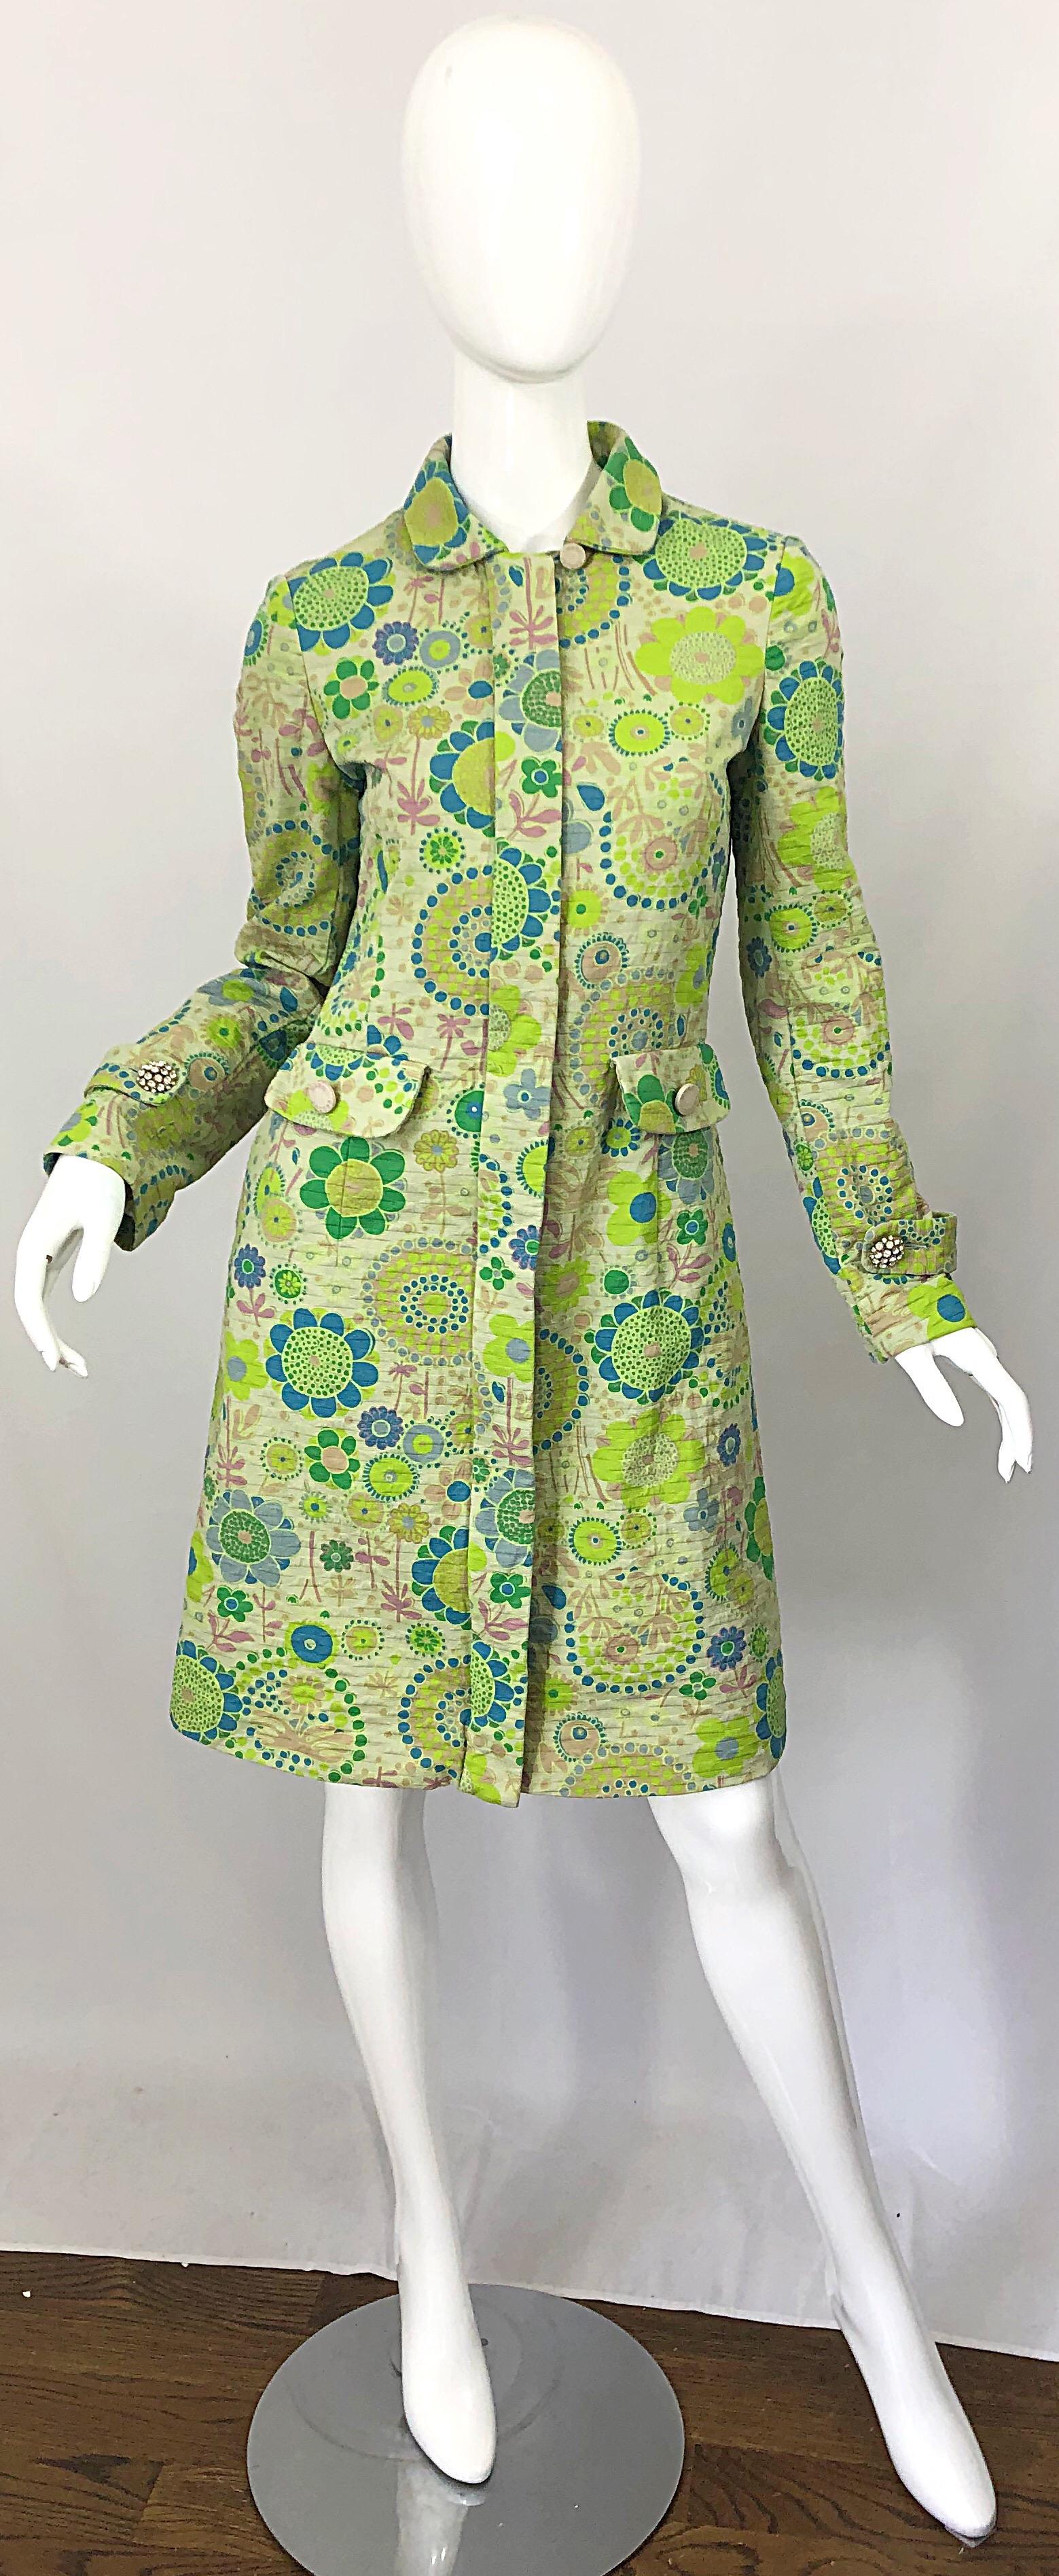 Chic MARC JACOBS Early 2000s Collection neon green and blue mod retro print cotton trench jacket / coat ! Features mod 1960s style flower prints throughout. Sparkly large rhinestone buttons at each sleeve cuff. Marc Jacobs logo etched buttons